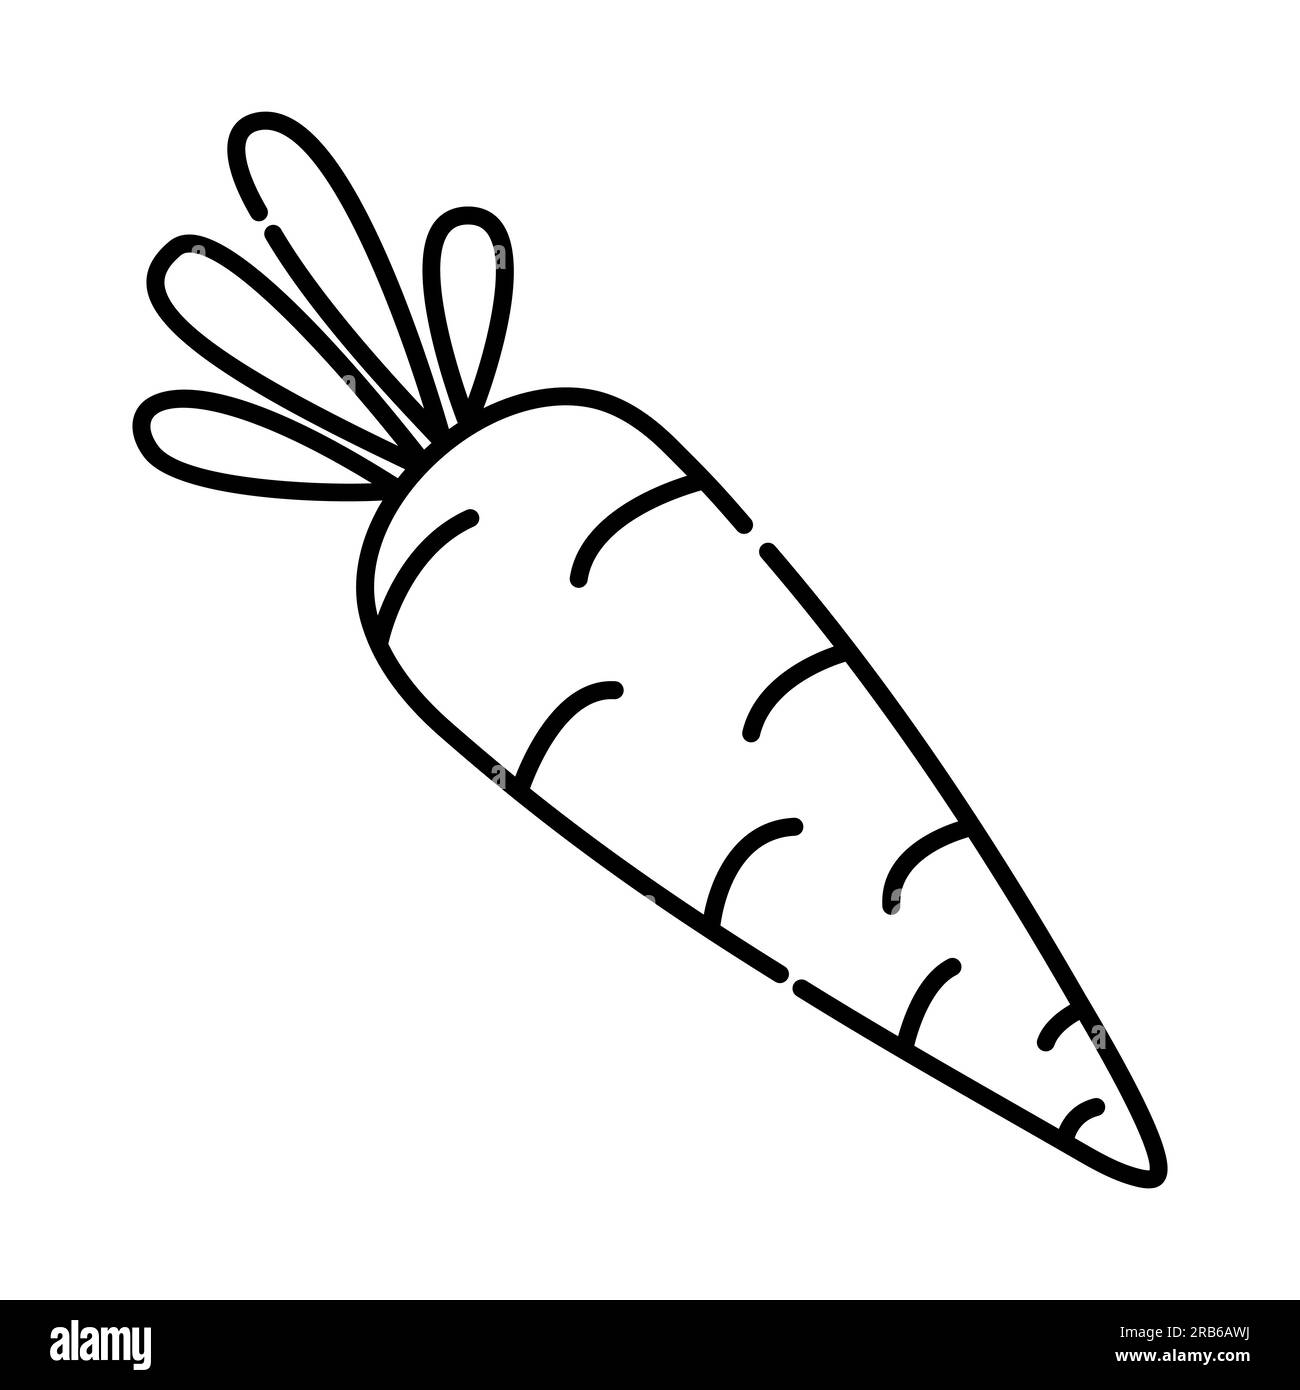 Carrot black and white vector line icon Stock Vector